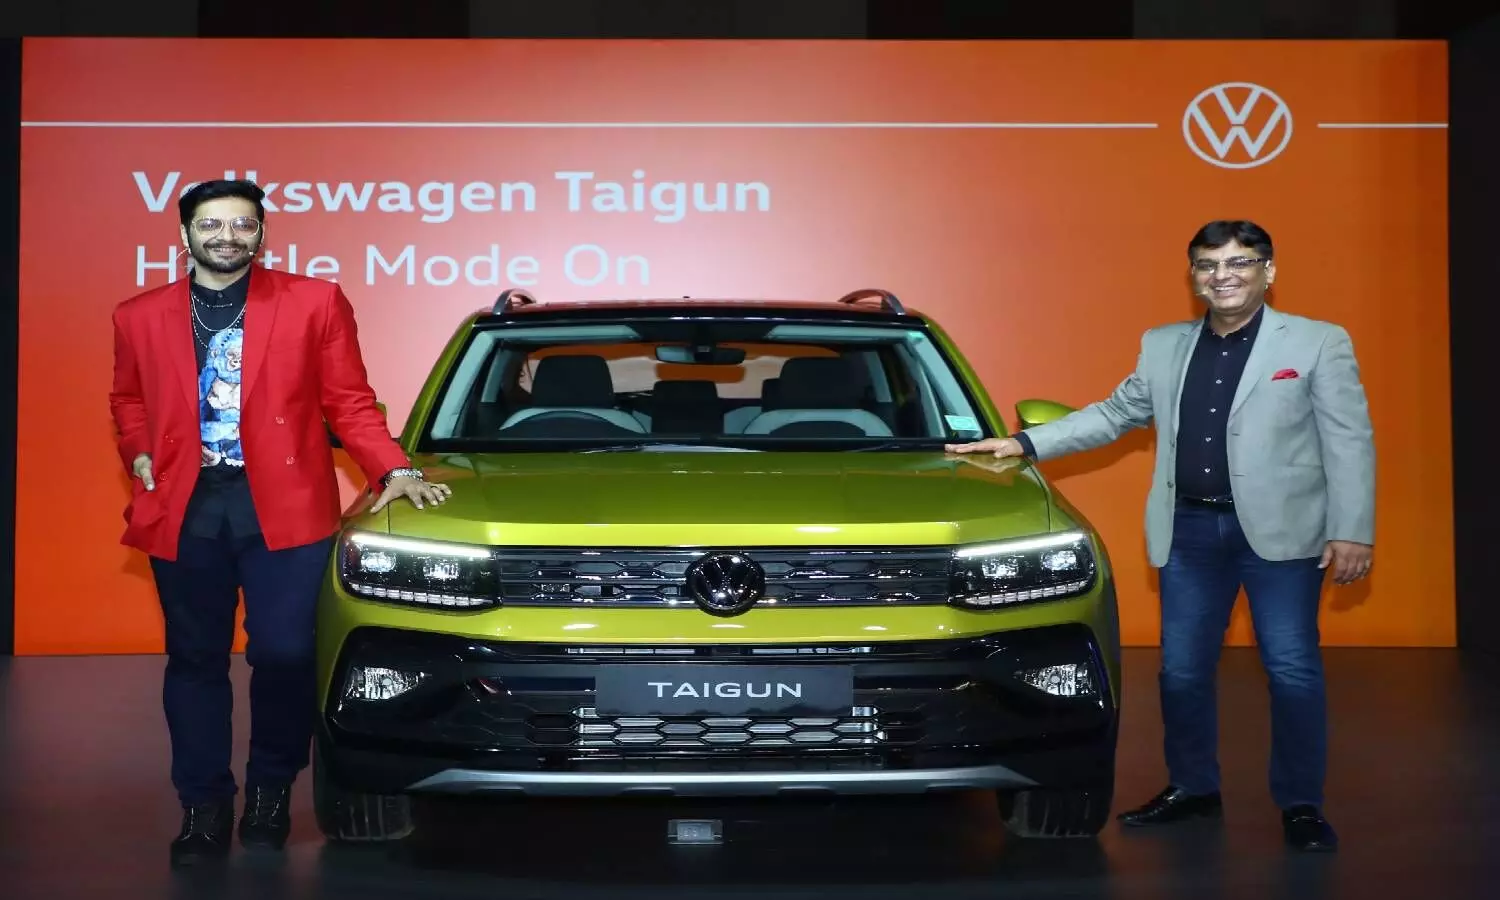 Explained: Volkswagen Taigun, the new SUV in India